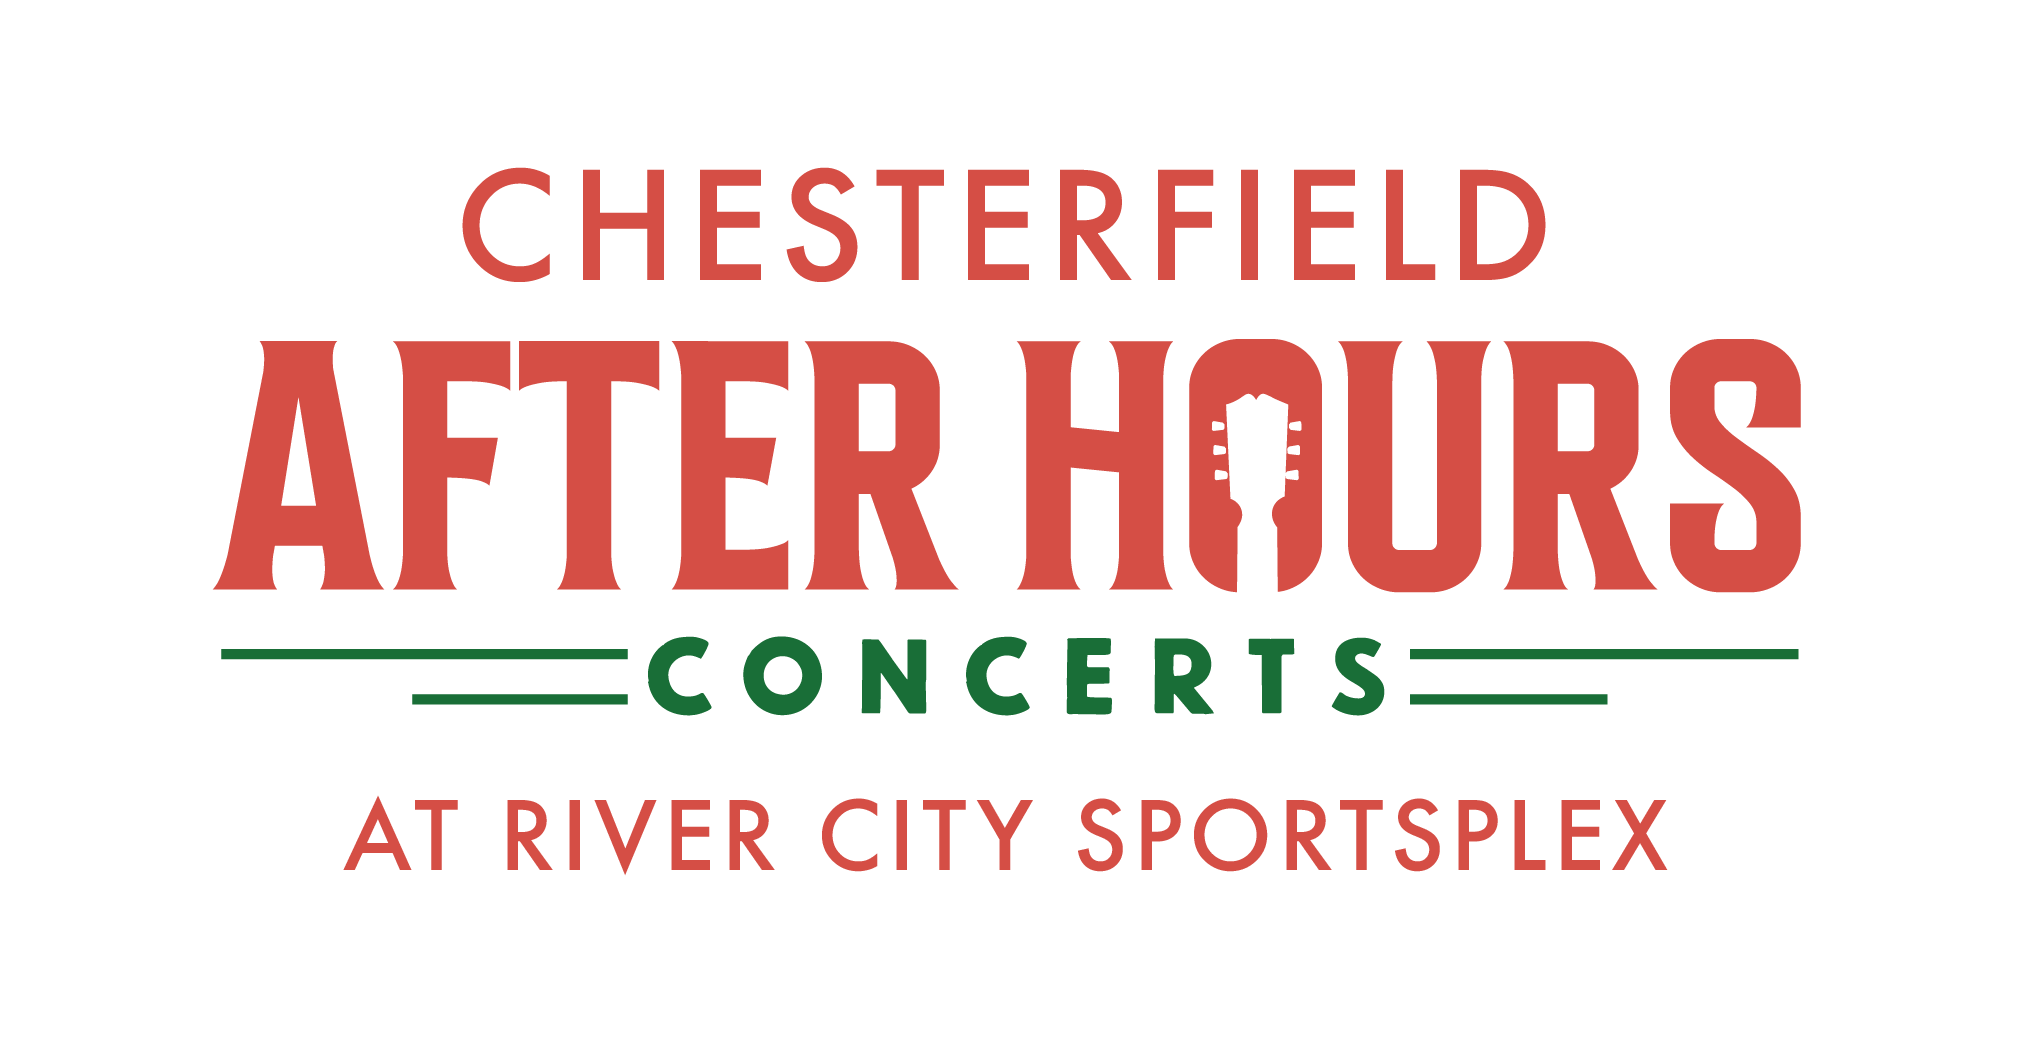 38 SPECIAL IS COMING TO CHESTERFIELD AFTER HOURS AT RIVER CITY